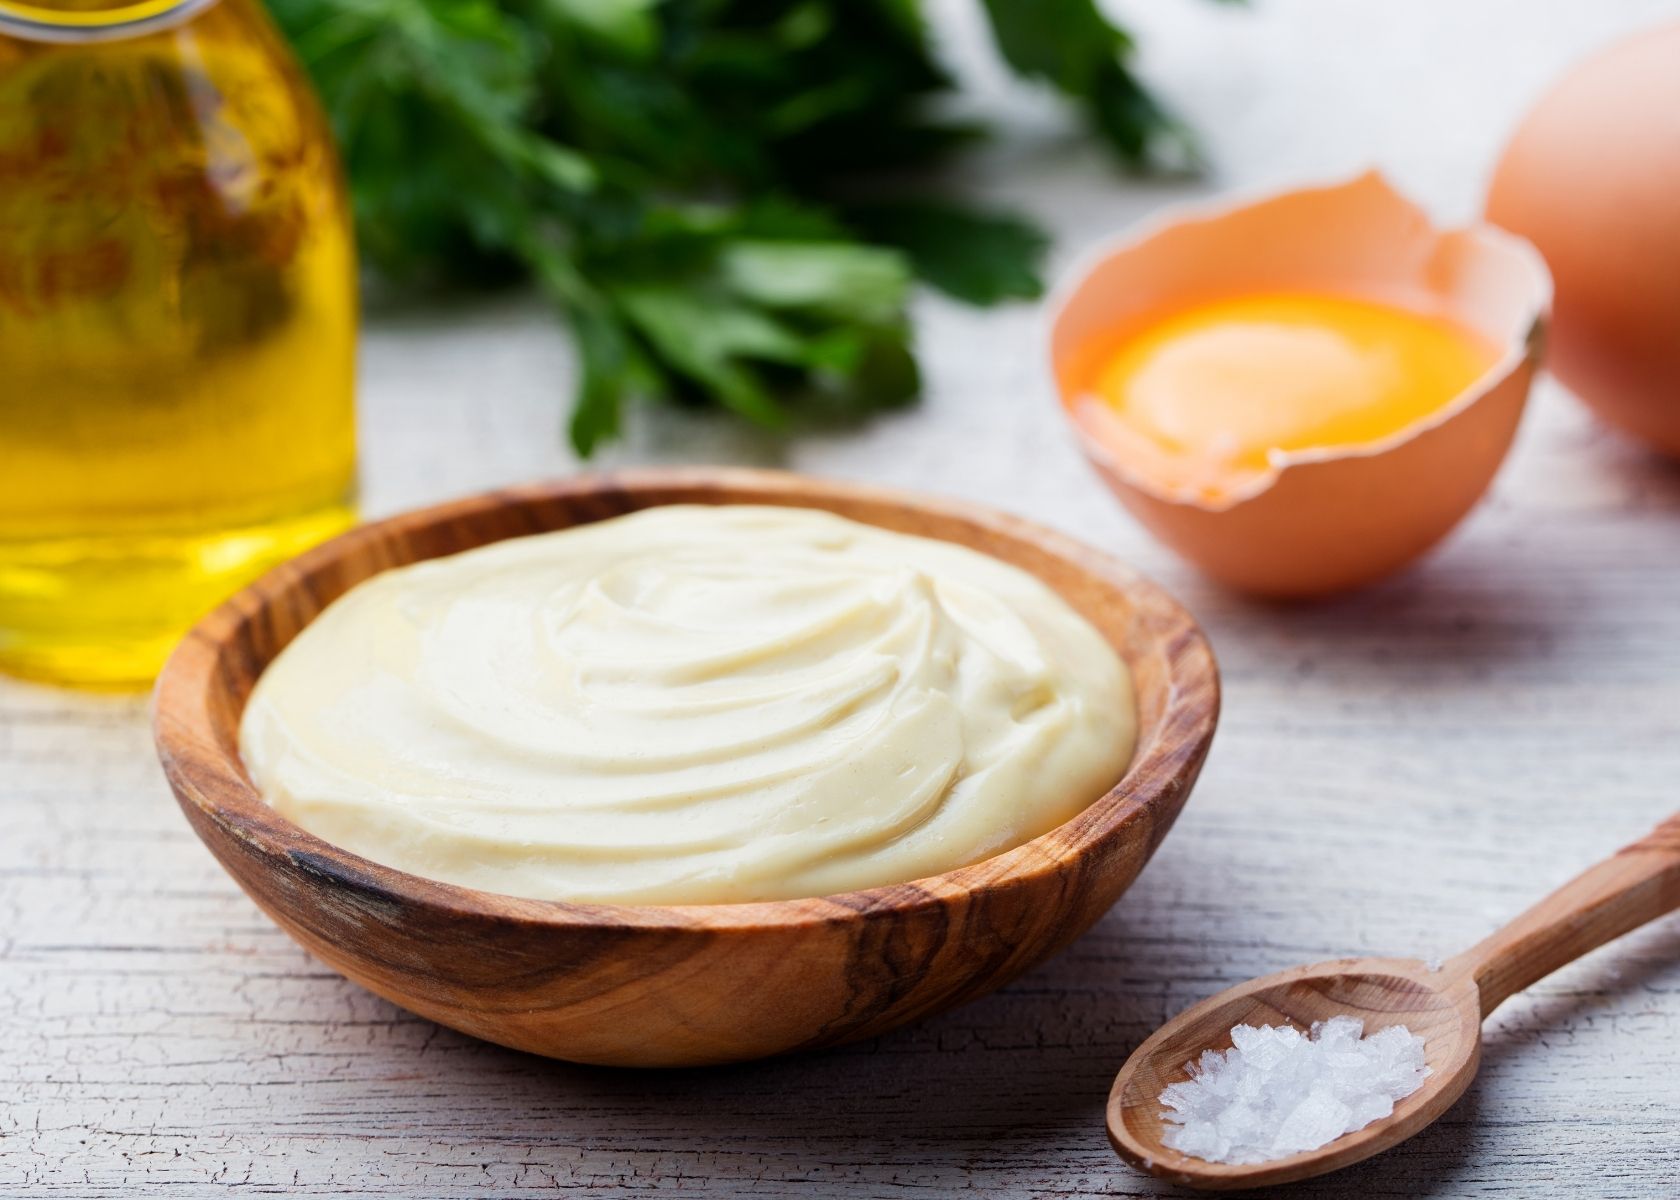 Homemade mayonnaise in wooden bowl next to recipe ingredients like egg, oil and salt.